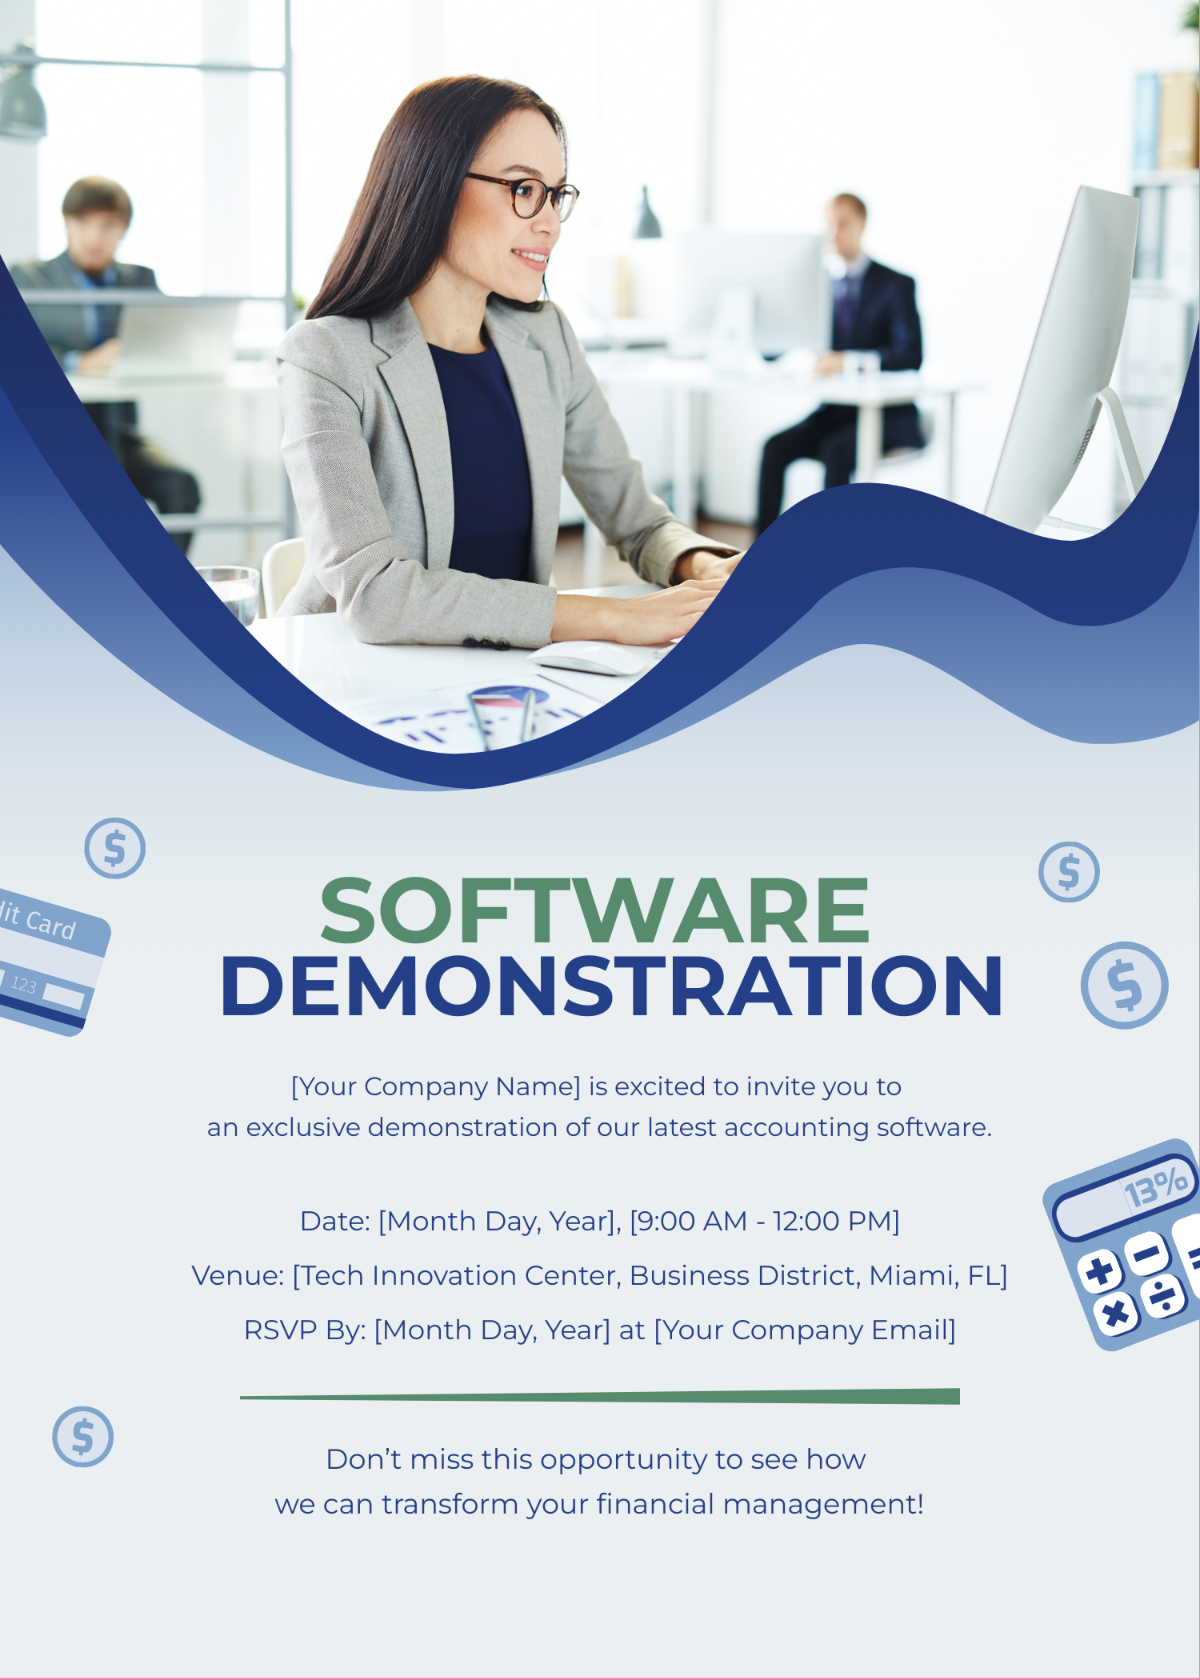 Accounting Software Demonstration Invitation Card Template